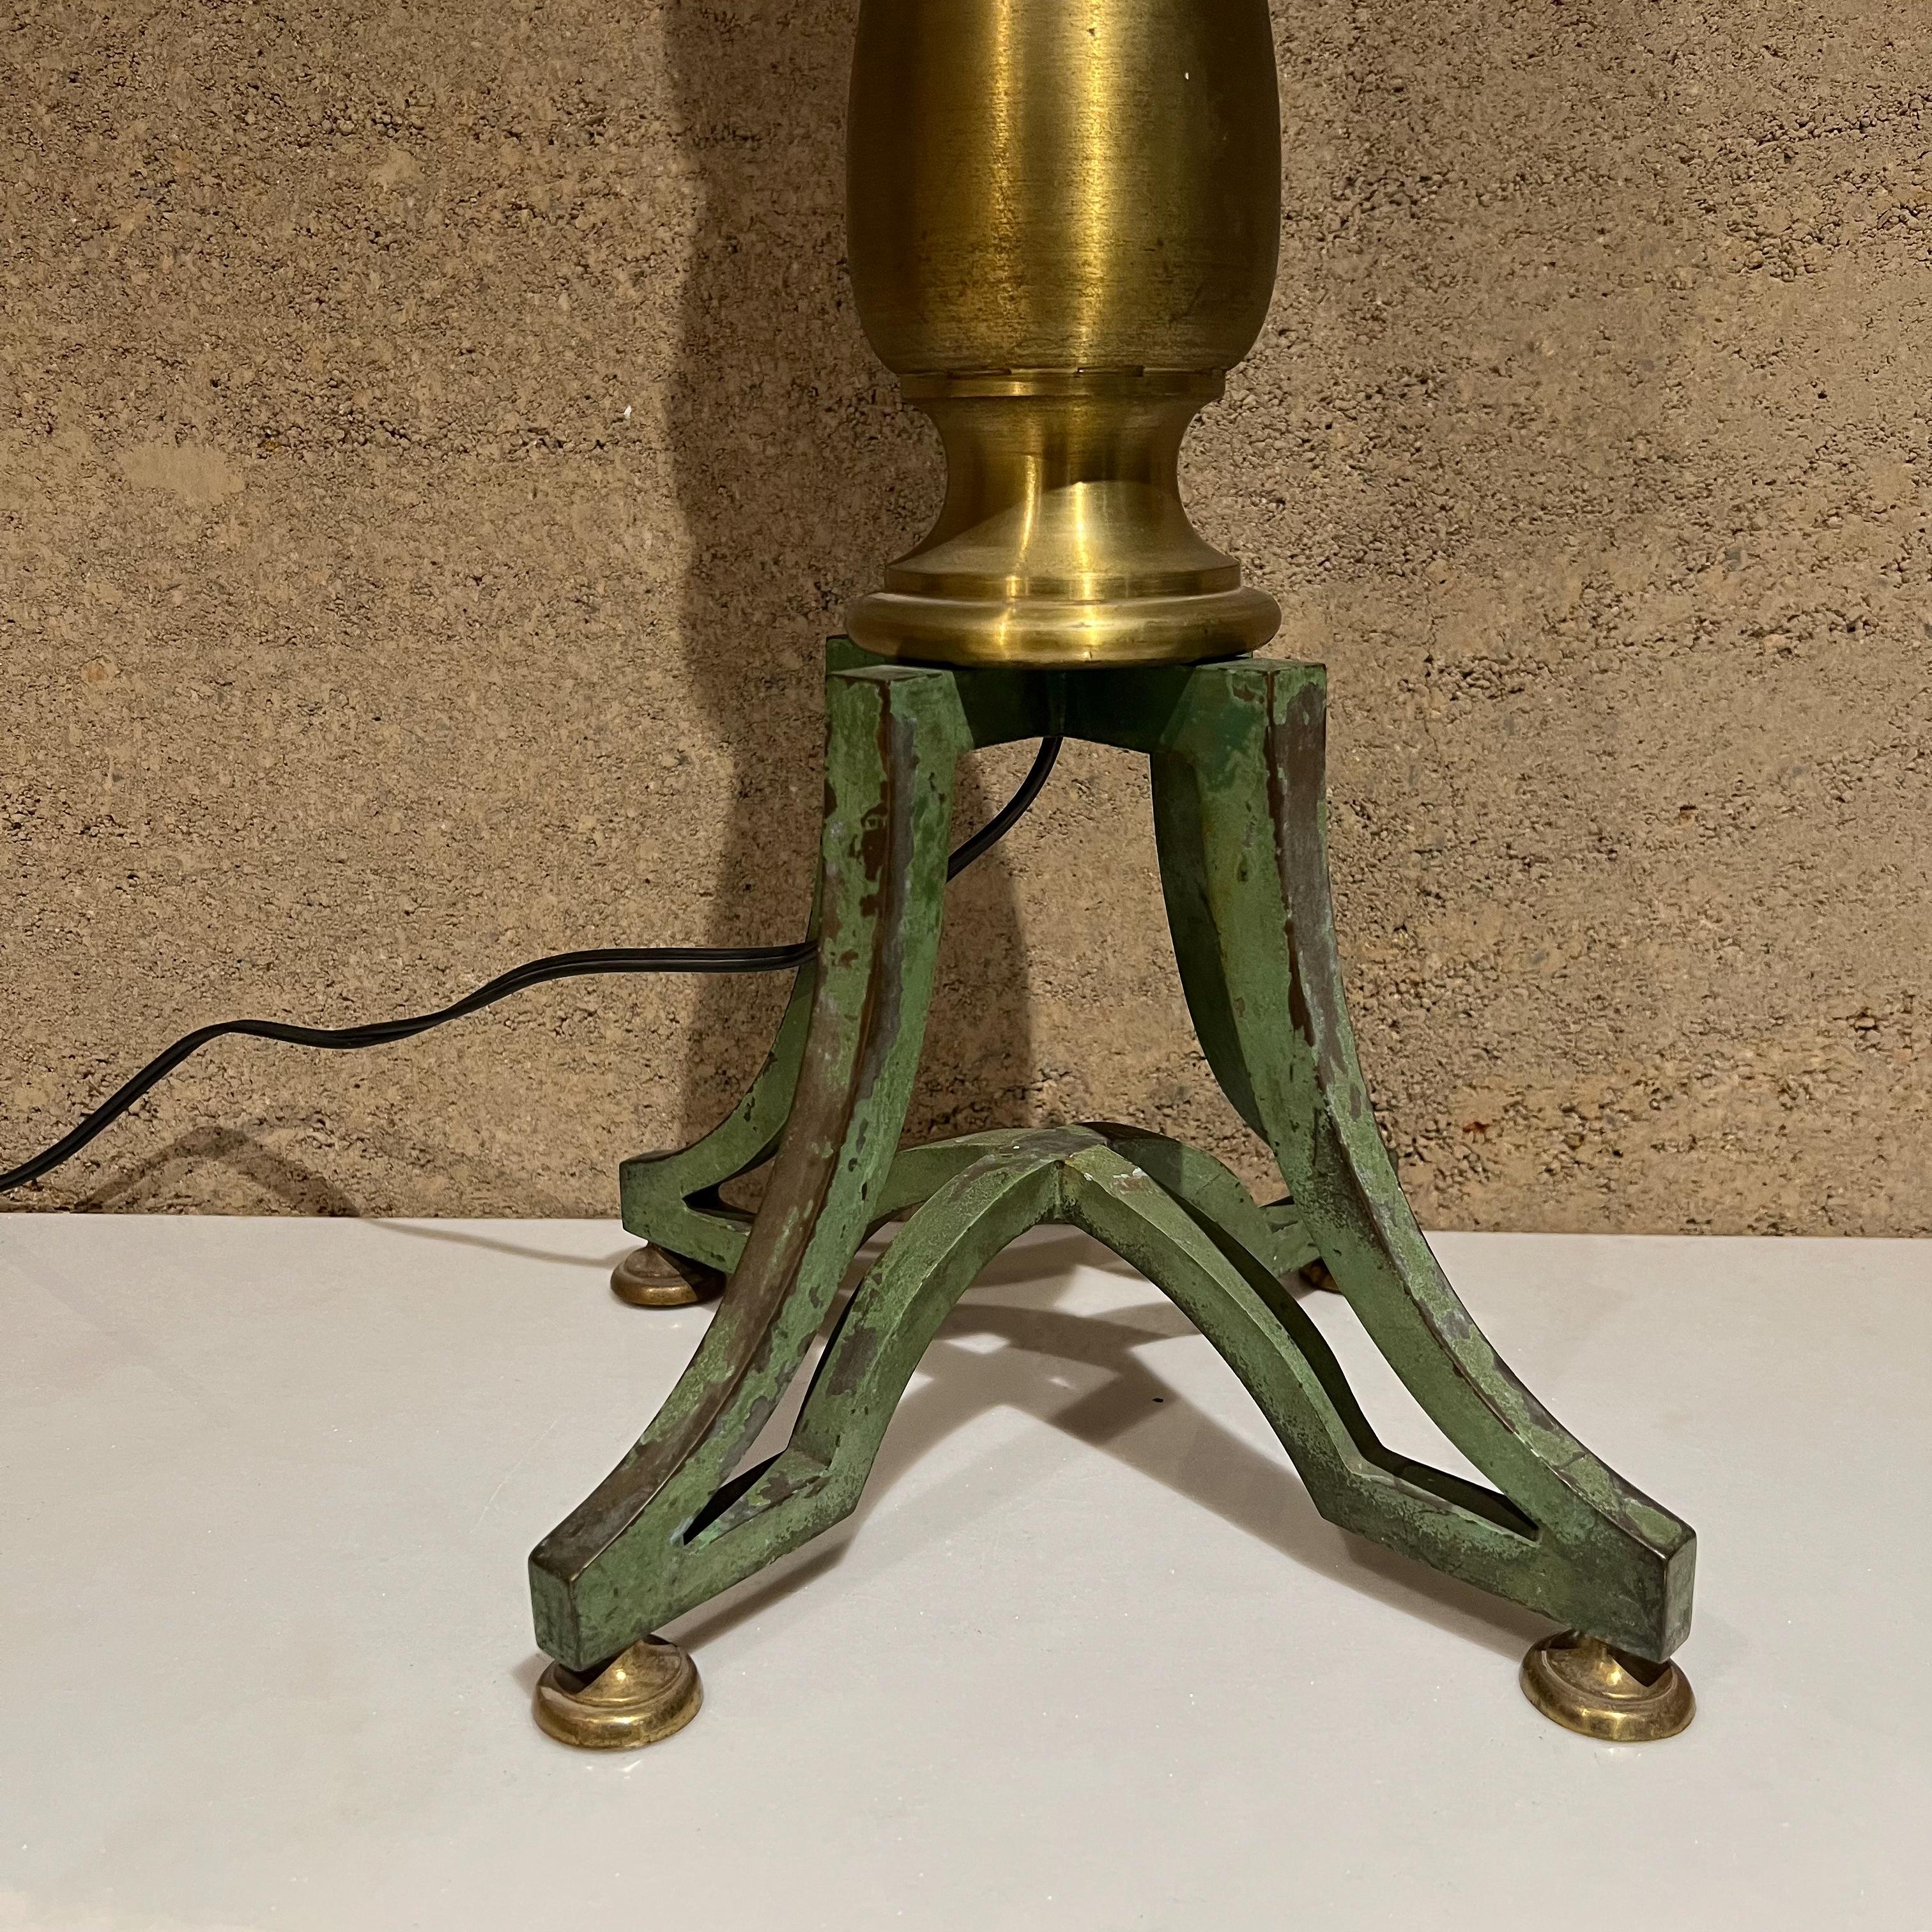 1950s Arturo Pani Regency Tall Table Lamp Forged Iron Patinated Brass Mexico  For Sale 5